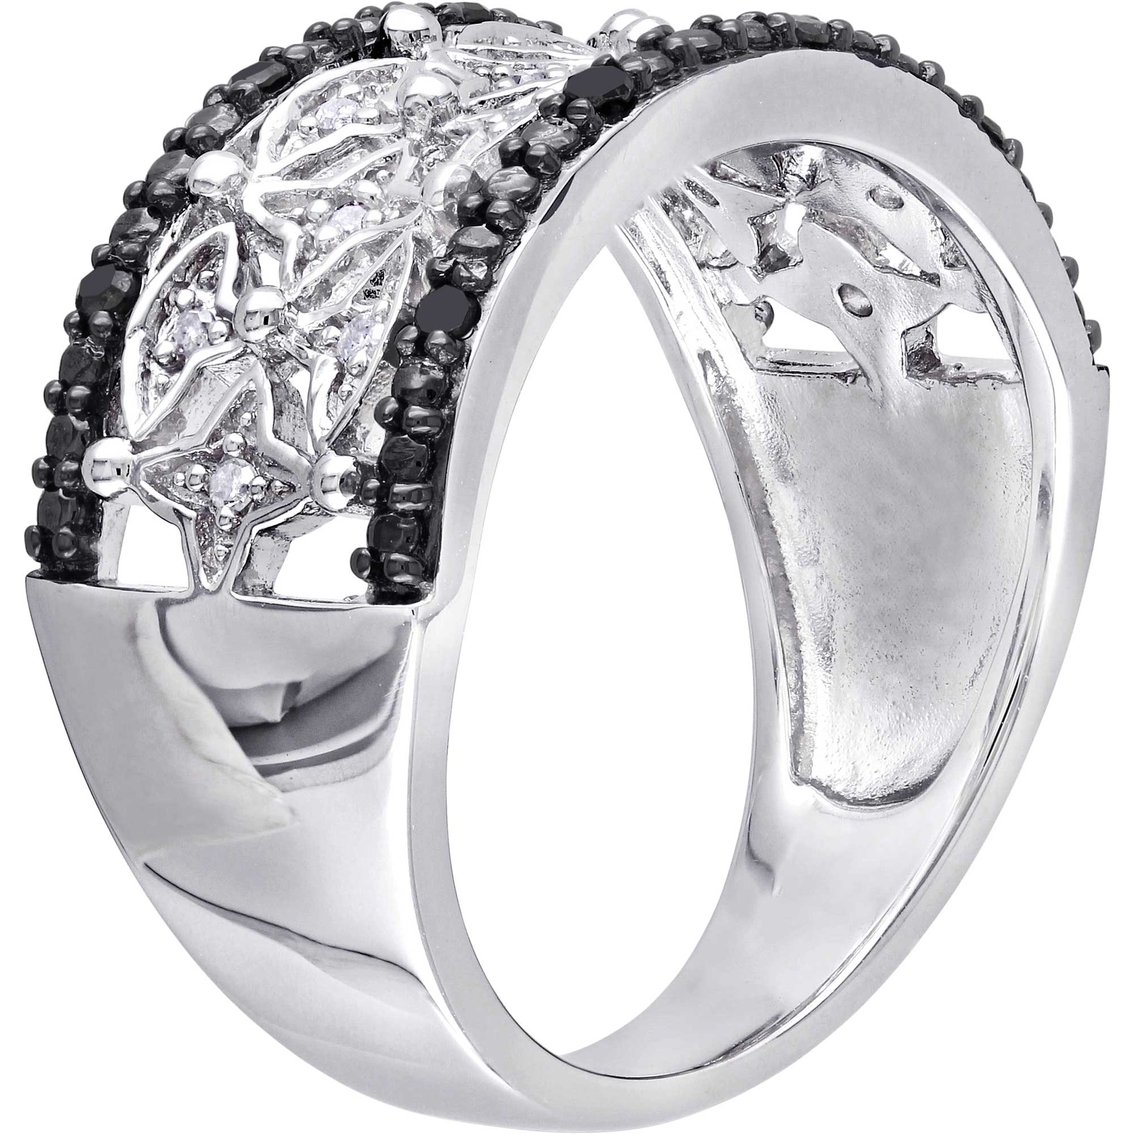 Sofia B. Sterling Silver 1/7 CTW Black and White Diamond Vintage Ring - Image 2 of 3